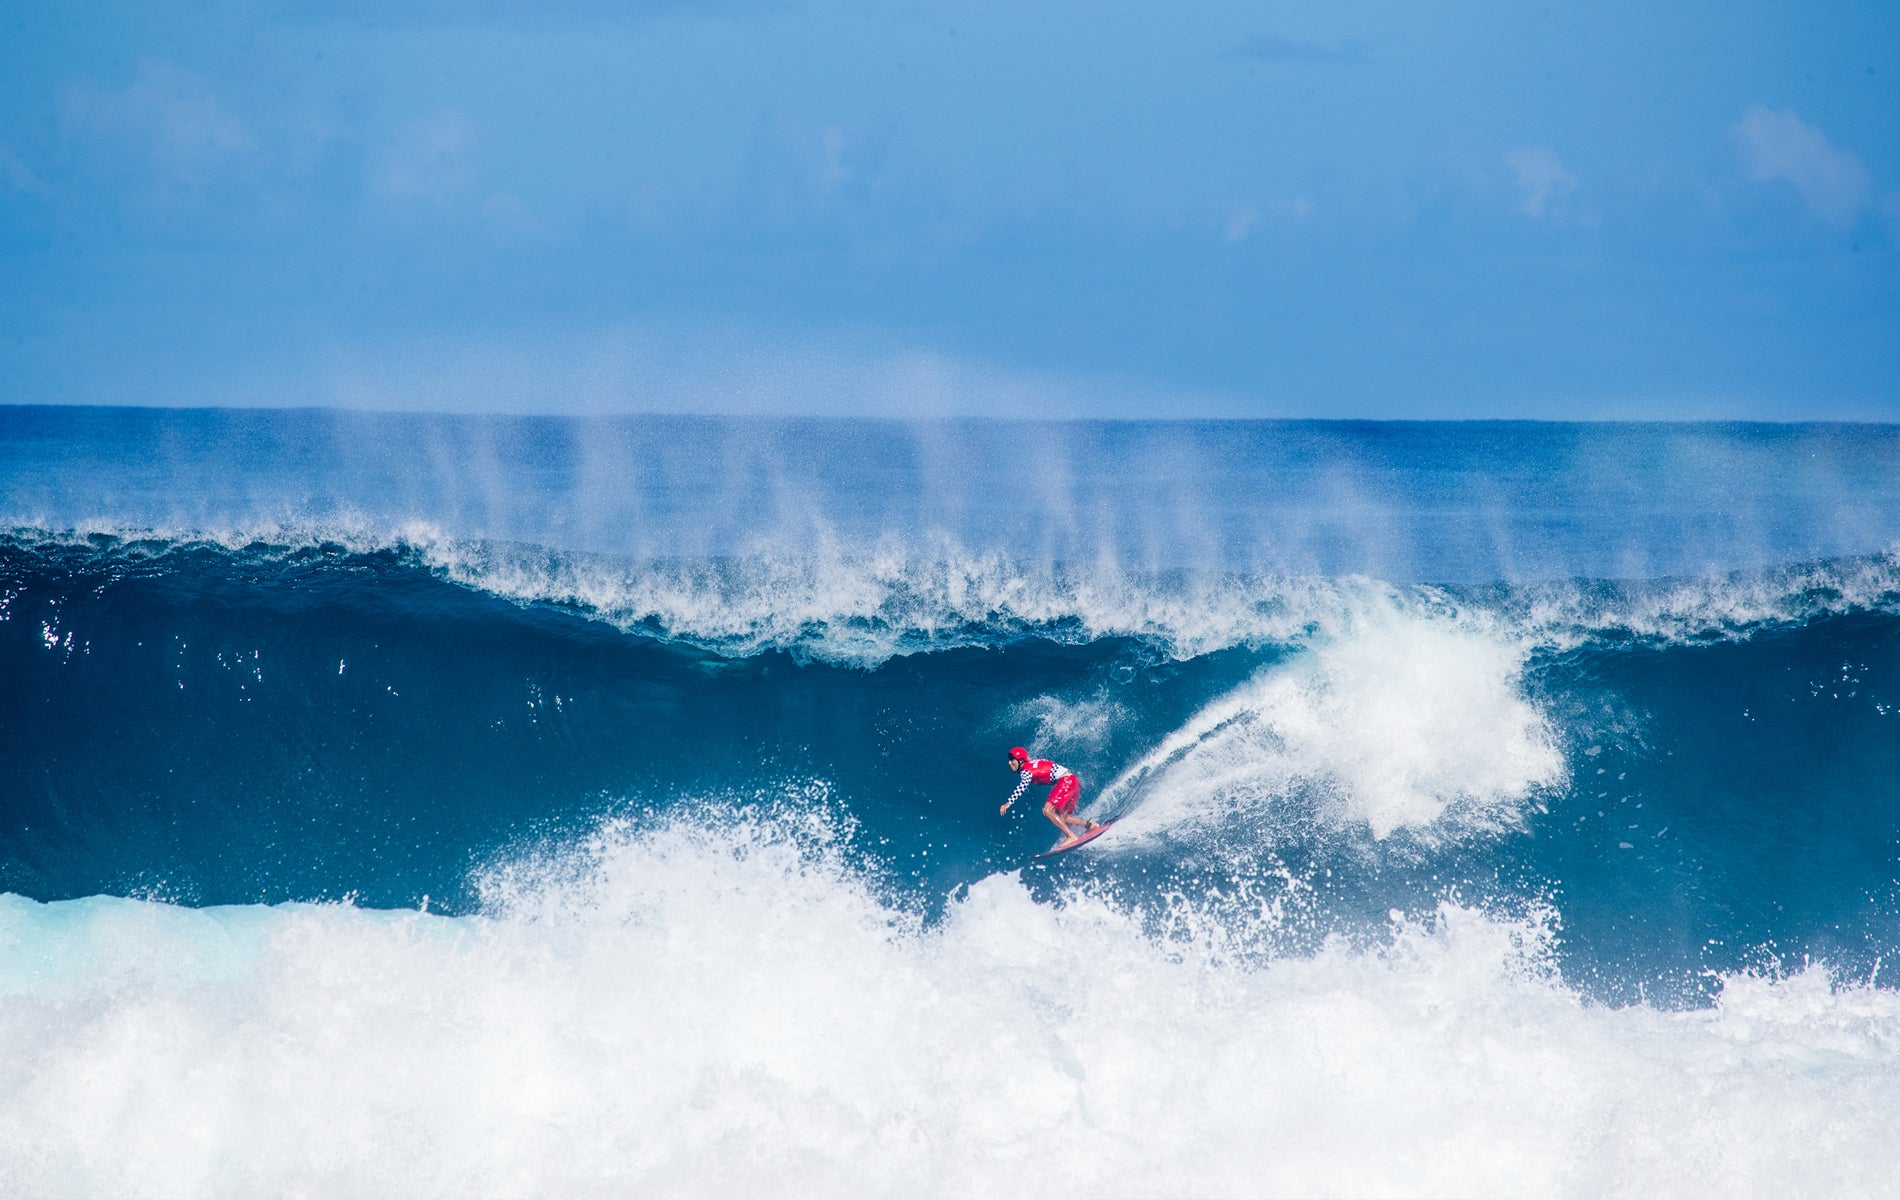 Joey Johnston competes in the Vans Pipemasters 2023